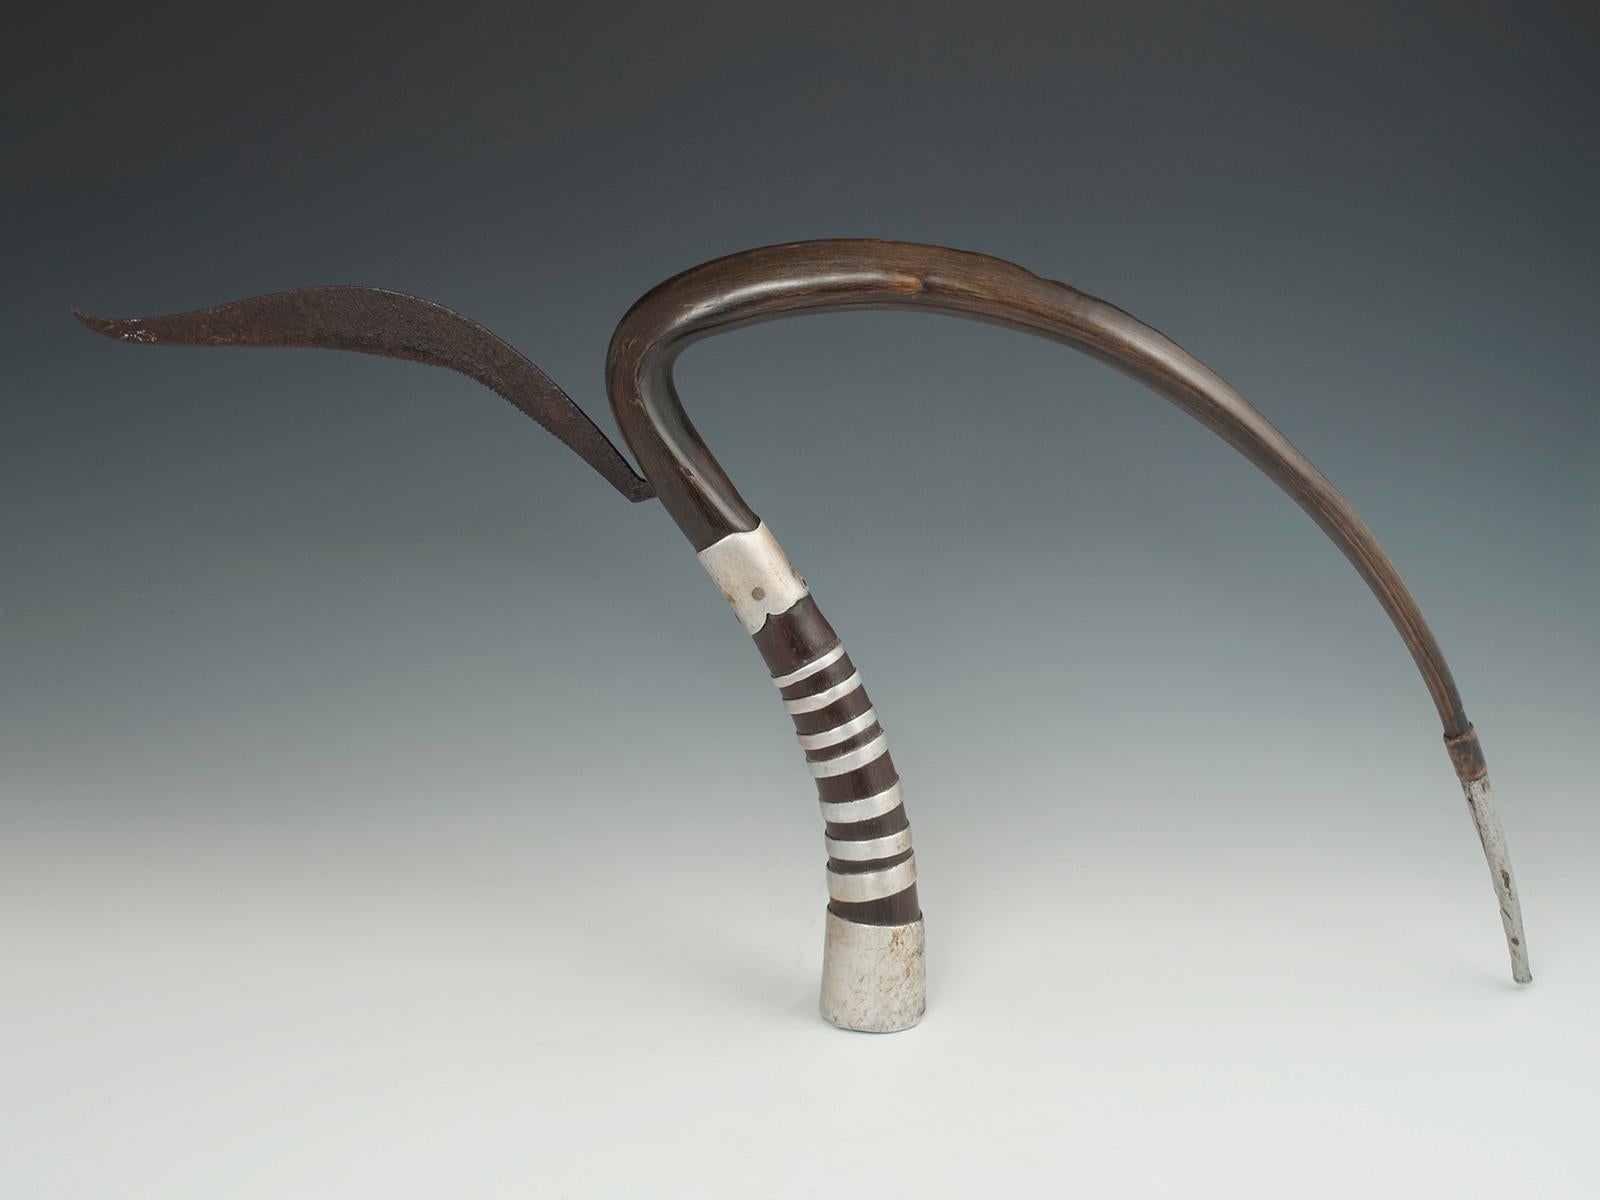 Early to mid-20th century tribal horn rice cutter, Khymer Culture, Cambodia.

The gracefully curved part of the ox horn was used to gather a handful of rice plants and then with a skillful turn of the wrist, the sheaf was cut with the iron blade.